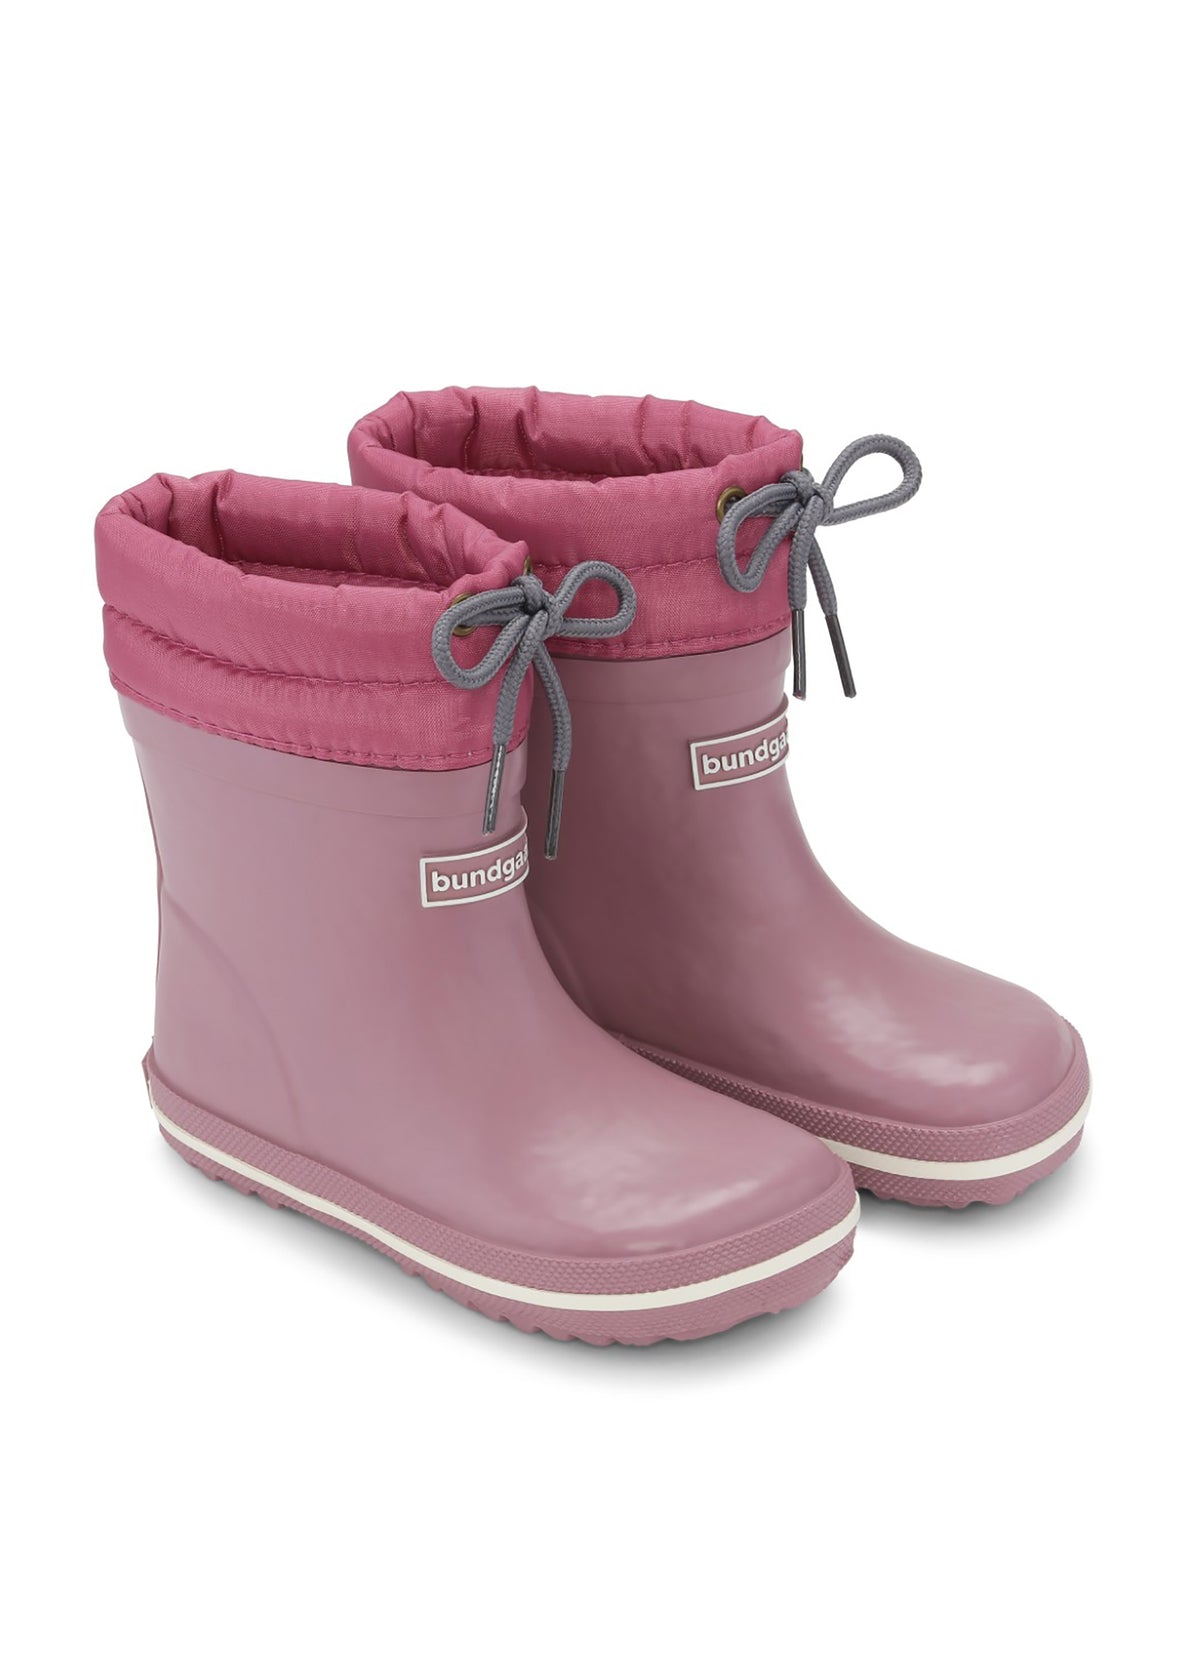 Rubber boots with a warm lining - dark pink, short shaft, drawstrings, Cirro Low Warm